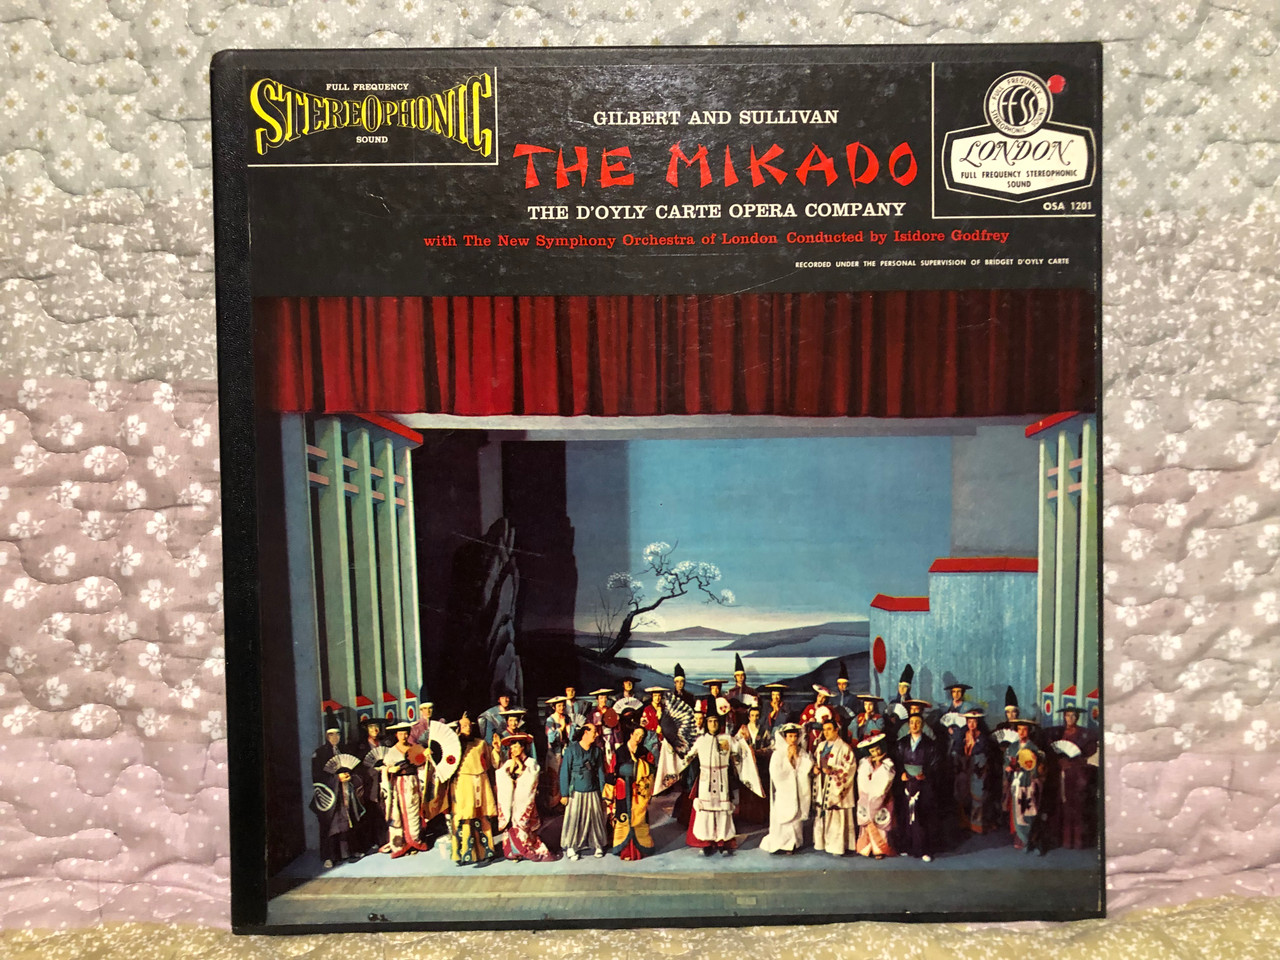 https://cdn10.bigcommerce.com/s-62bdpkt7pb/products/0/images/260237/Gilbert_And_Sullivan_-_The_Mikado_-_DOyly_Carte_Opera_Company_with_The_New_Symphony_Orchestra_Of_London_Conducted_By_Isidore_Godfrey_London_Records_2x_LP_OSA-1201_1__64506.1670520805.1280.1280.JPG?c=2&_gl=1*1x4x9f6*_ga*MjA2NTIxMjE2MC4xNTkwNTEyNTMy*_ga_WS2VZYPC6G*MTY3MDUxMTg2My42NjEuMS4xNjcwNTIwNzYwLjYwLjAuMA..